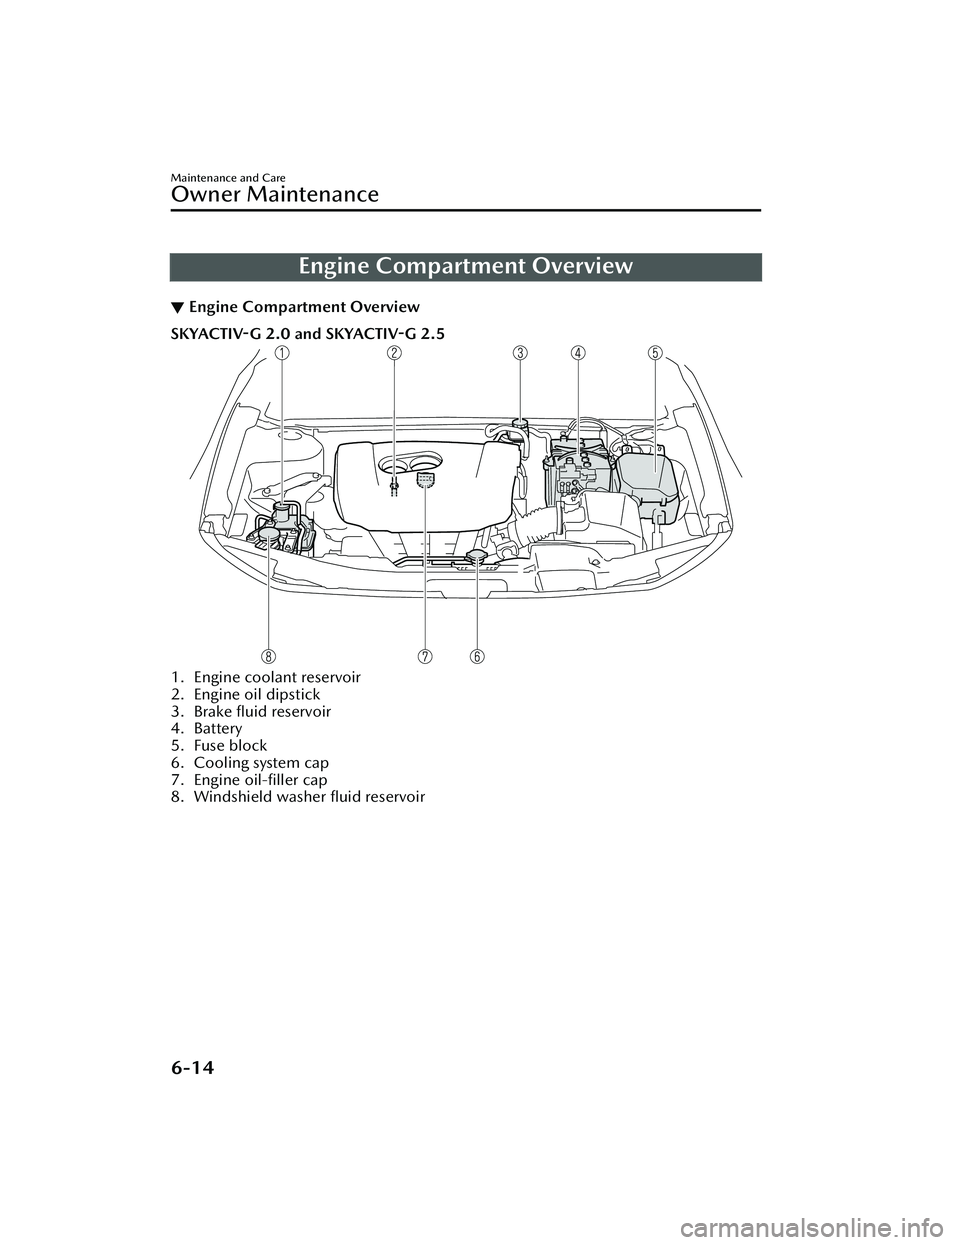 MAZDA CX30 2023  Owners Manual Engine Compartment Overview
▼Engine Compartment Overview
SKYACTIV-G 2.0 and SKYACTIV-G 2.5
1. Engine coolant reservoir
2. Engine oil dipstick
3. Brake ﬂuid reservoir
4. Battery
5. Fuse block
6. Co